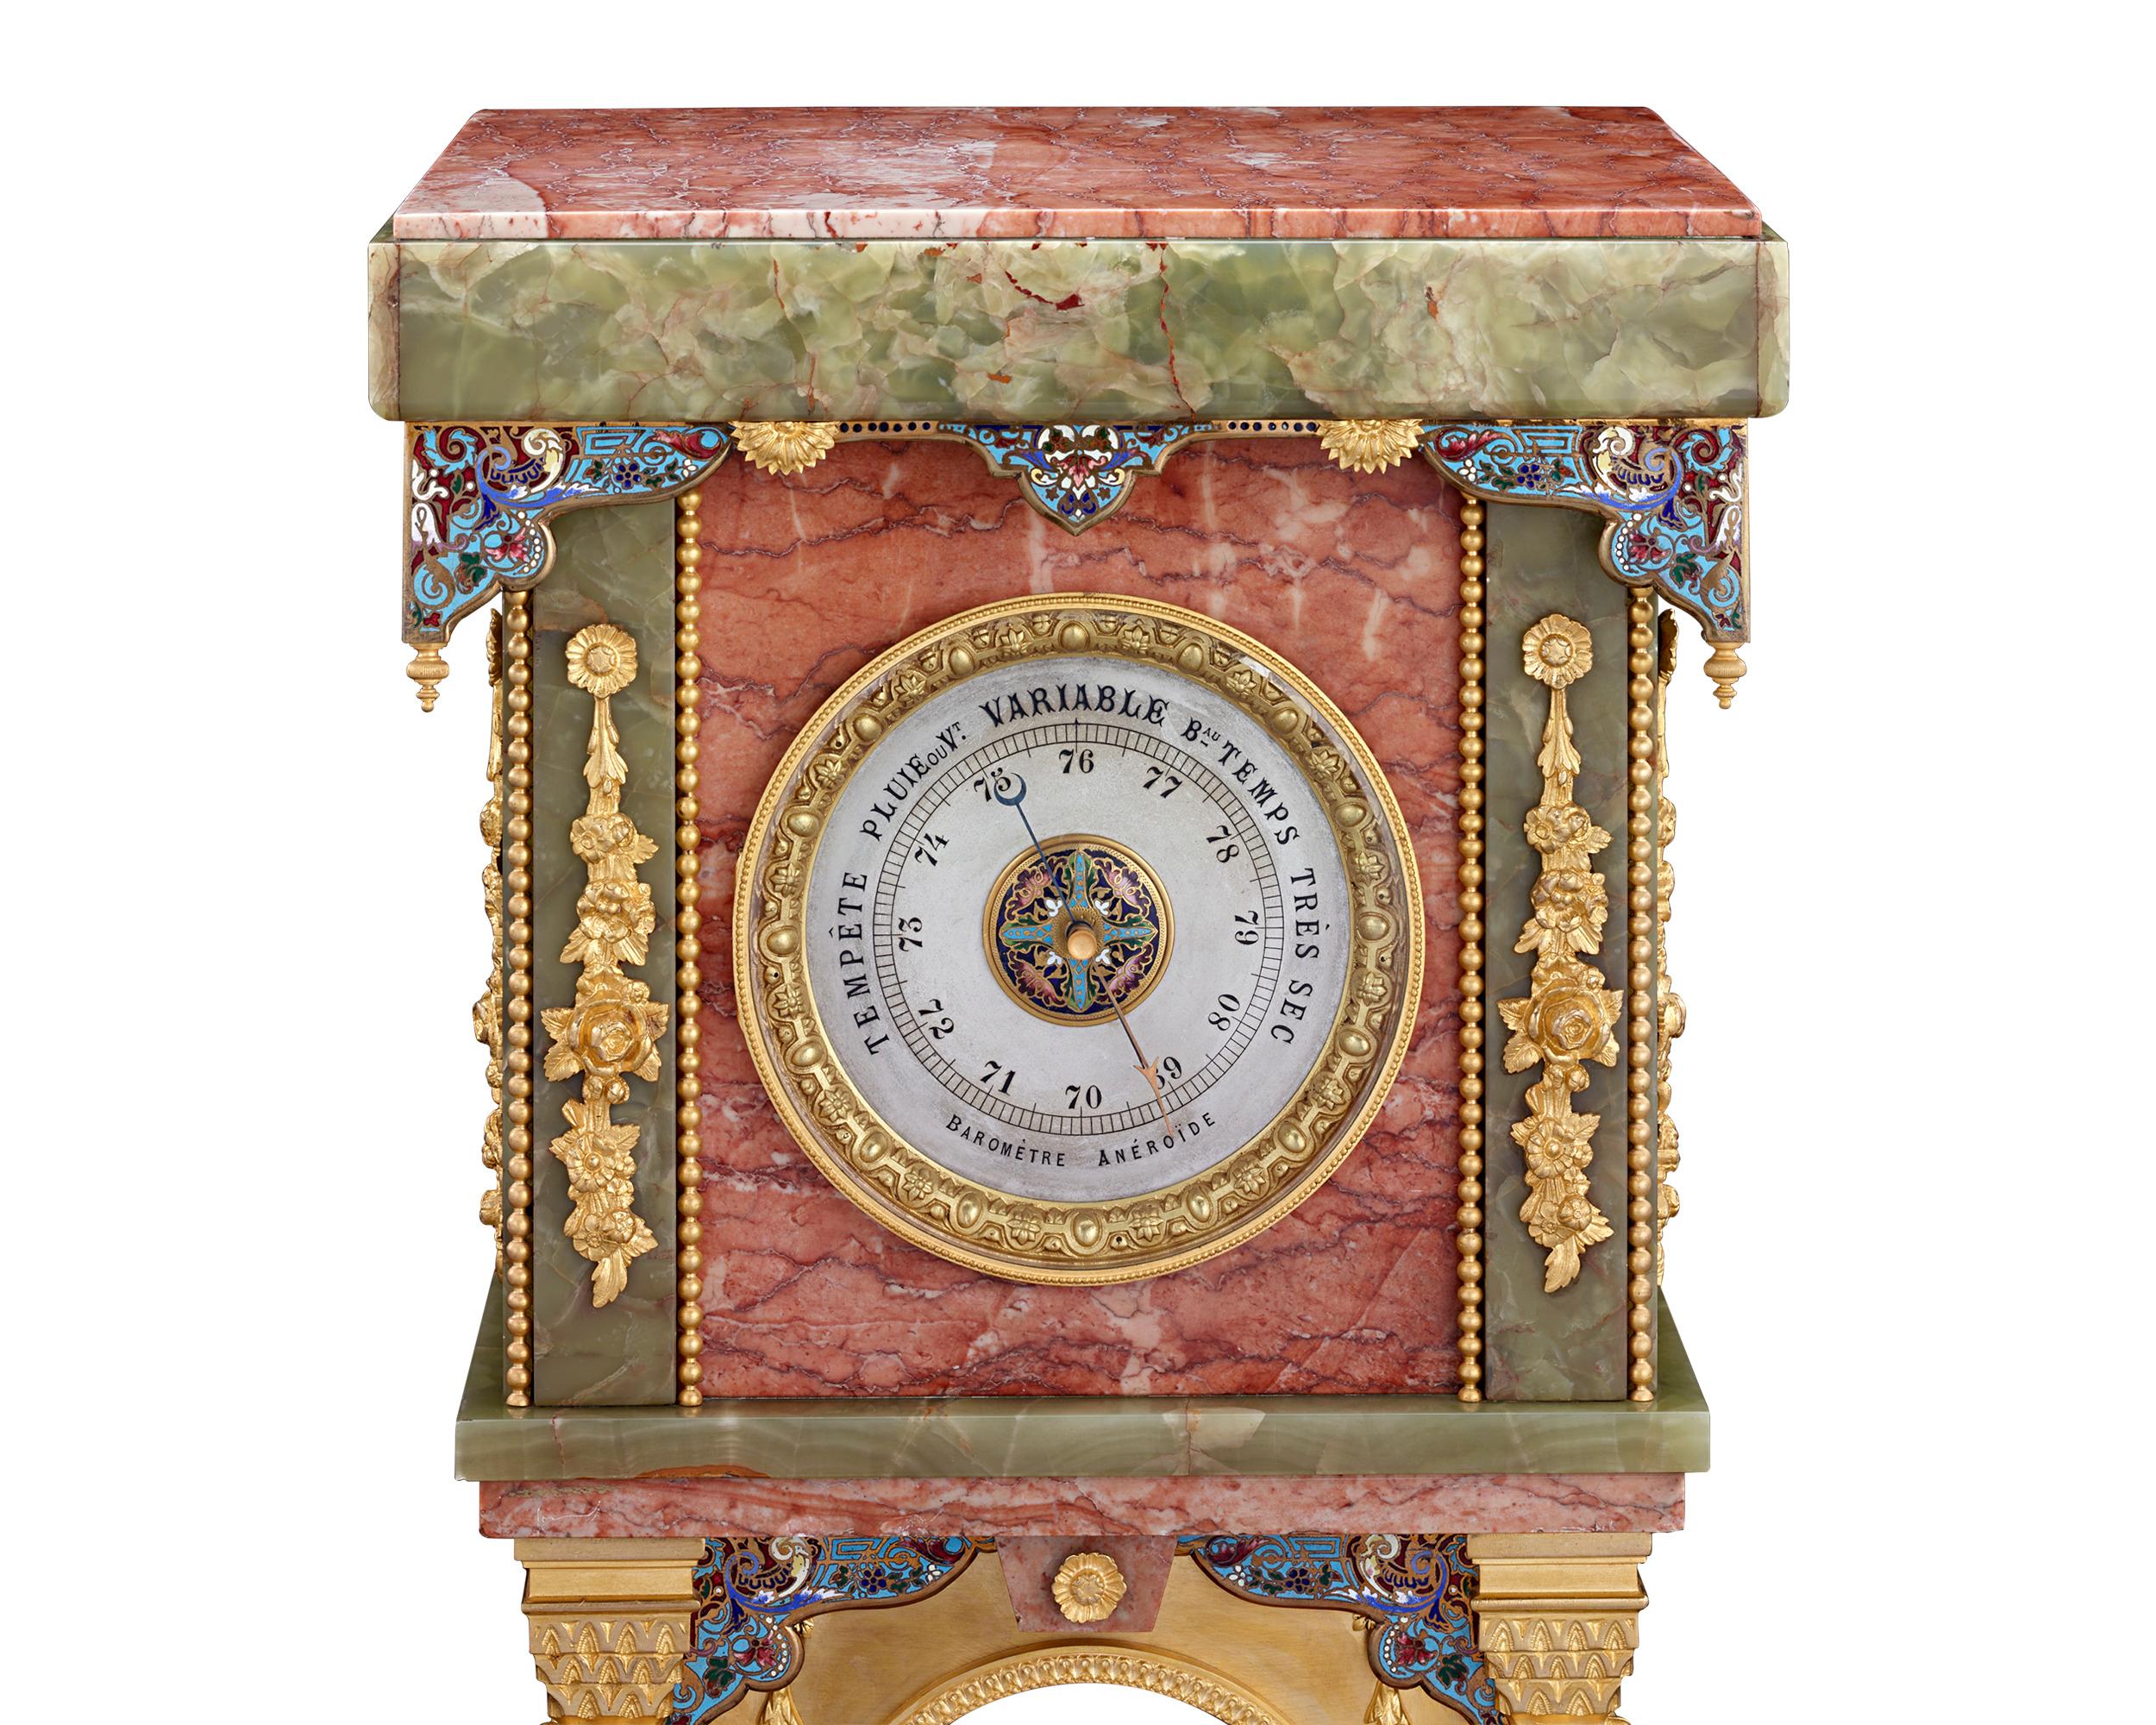 French Marble, Onyx, Enamel and Ormolu Pedestal Clock In Excellent Condition For Sale In New Orleans, LA